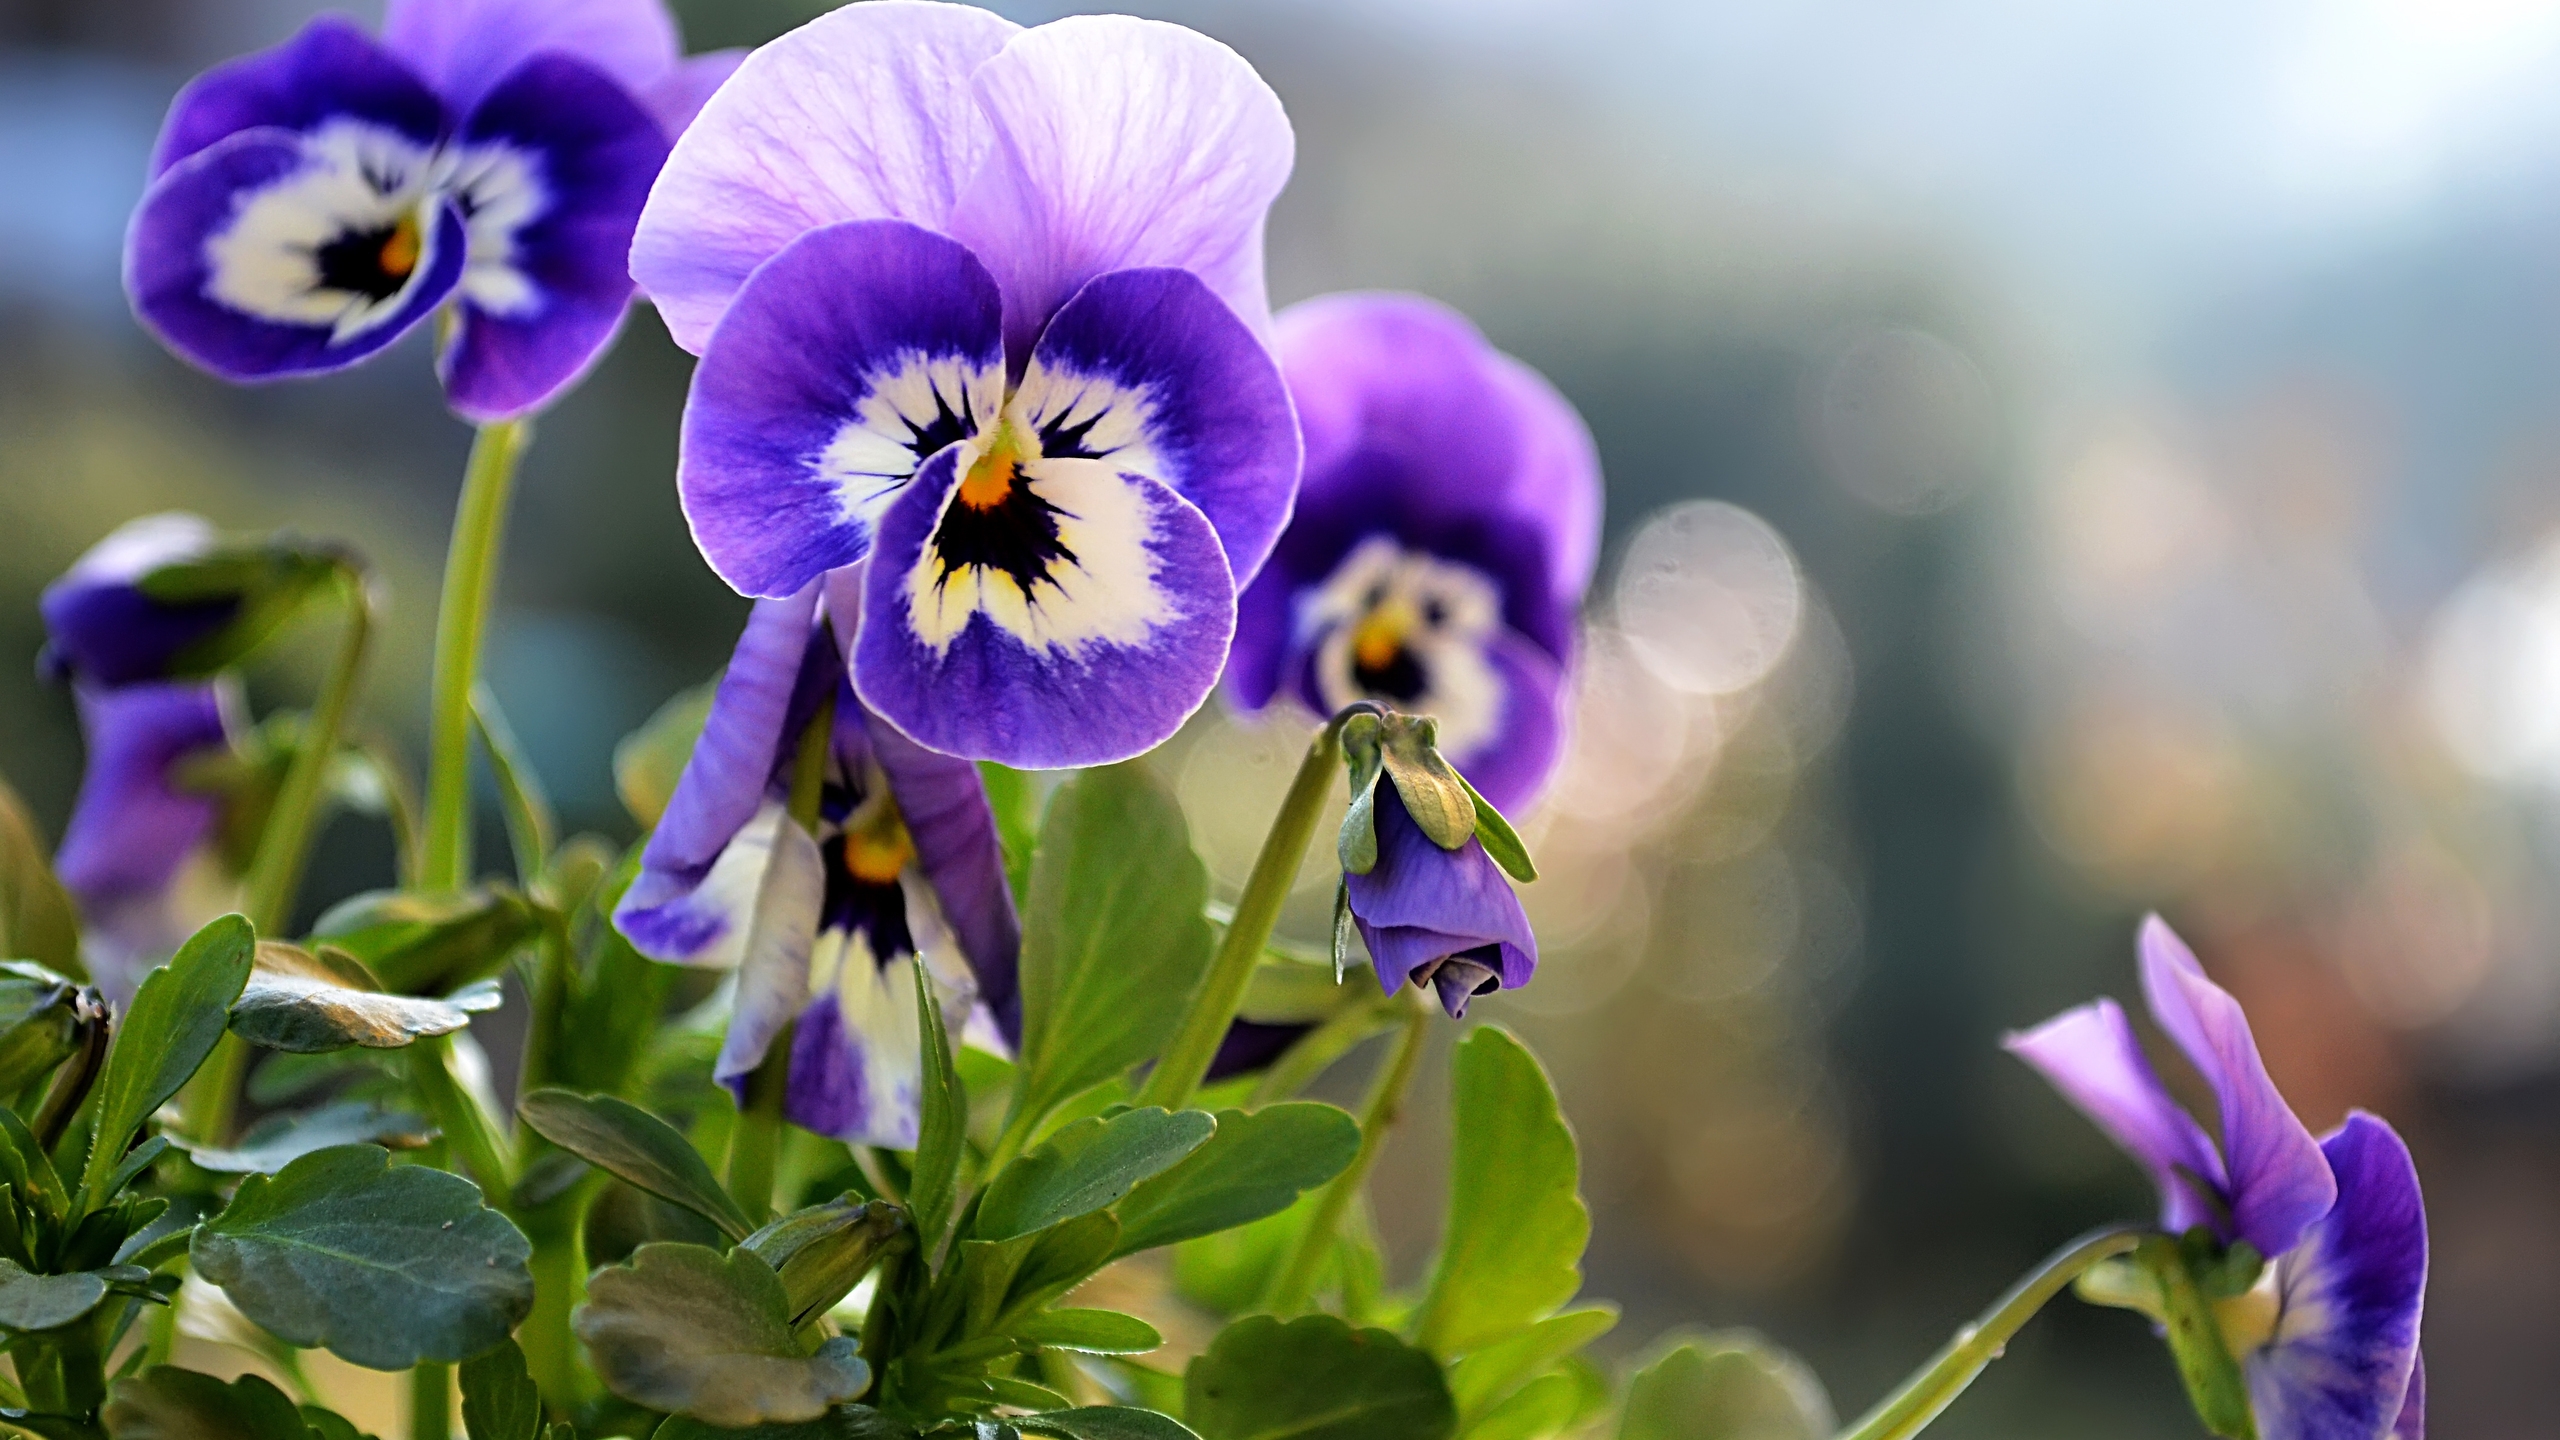 Beautiful Little Pansies for 2560x1440 HDTV resolution